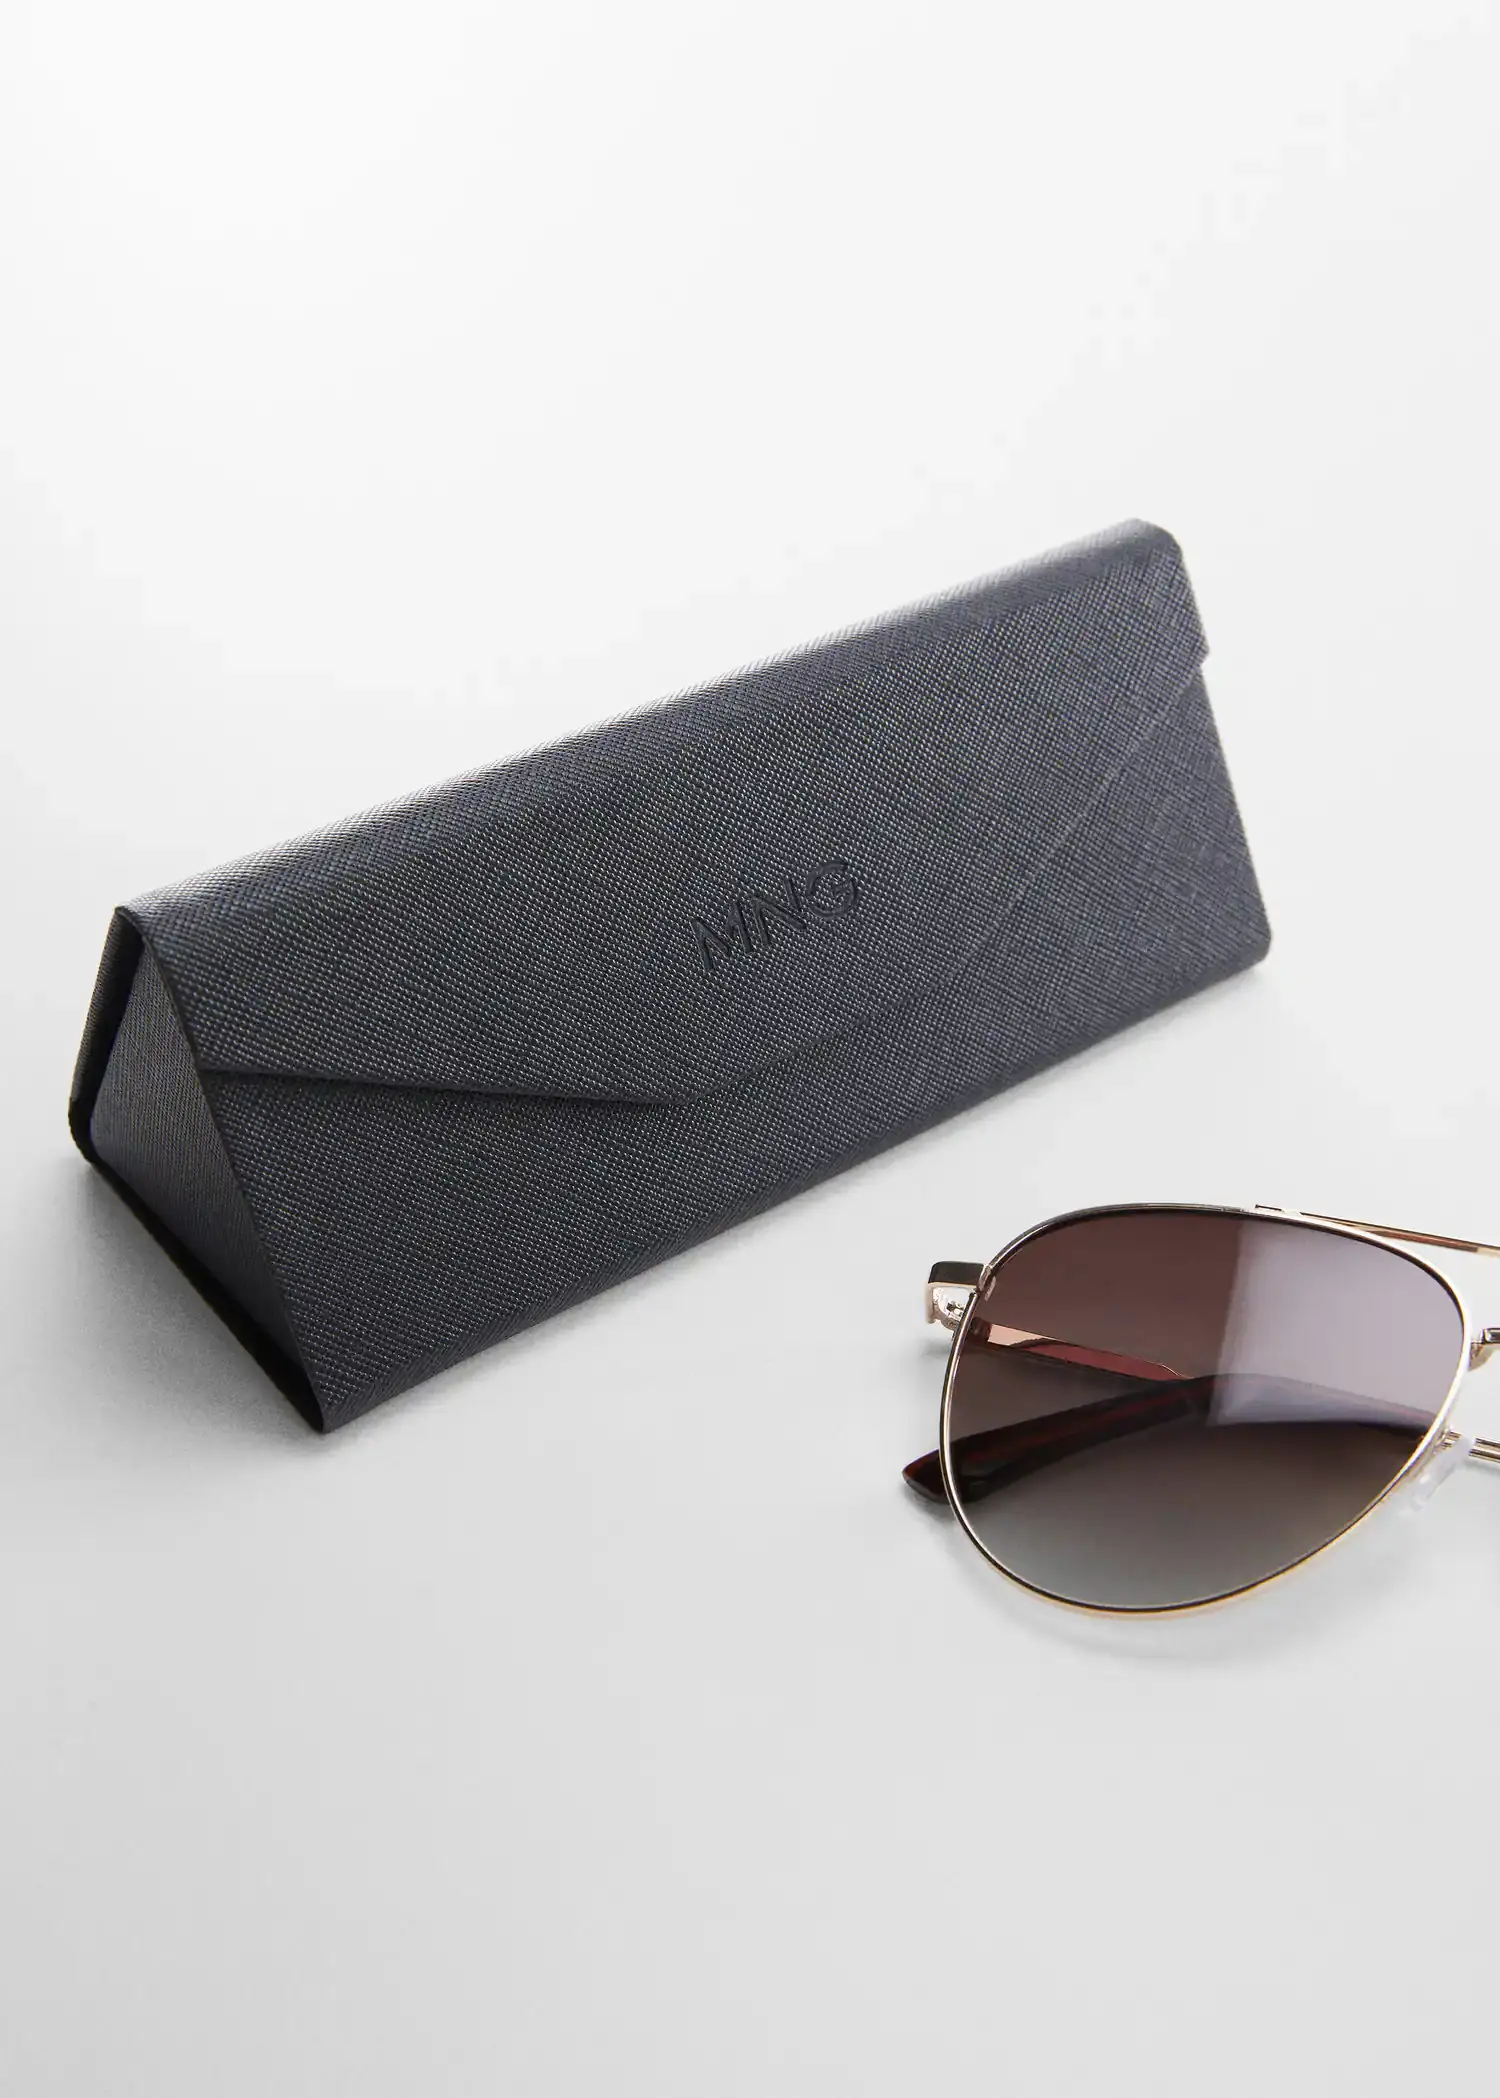 Mango Polarised sunglasses. a pair of sunglasses sitting on top of a table next to a case. 